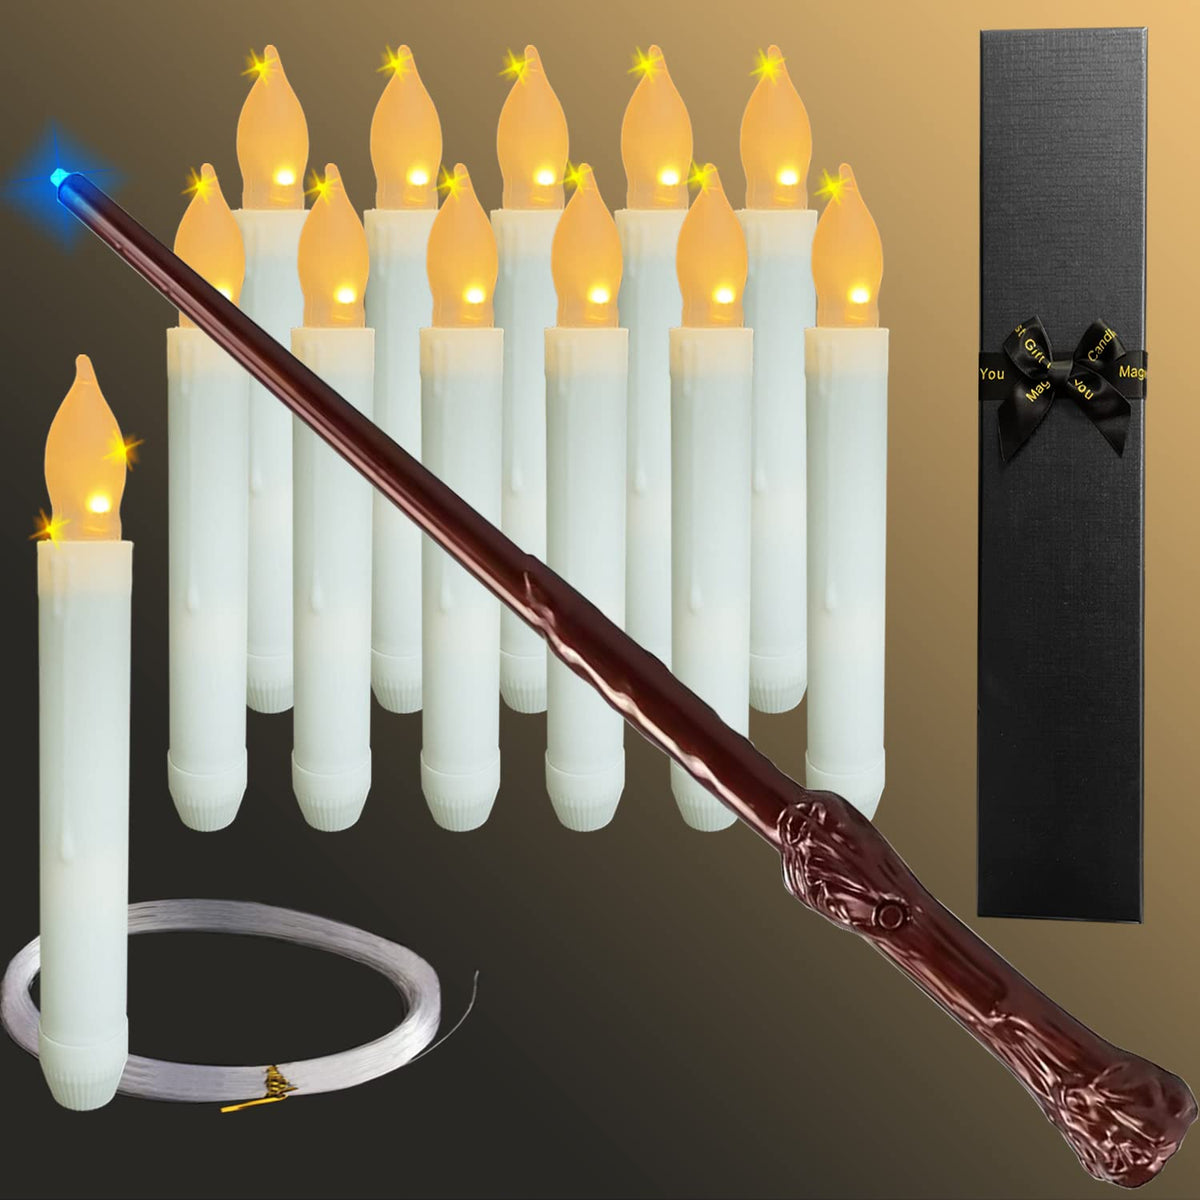 Christmas Decoration Indoor & Outdoor,12Pack Floating Candles Magic Wand  Remote,Xmas Witch Decor Flameless Hanging Candles for Harry Potter  Halloween